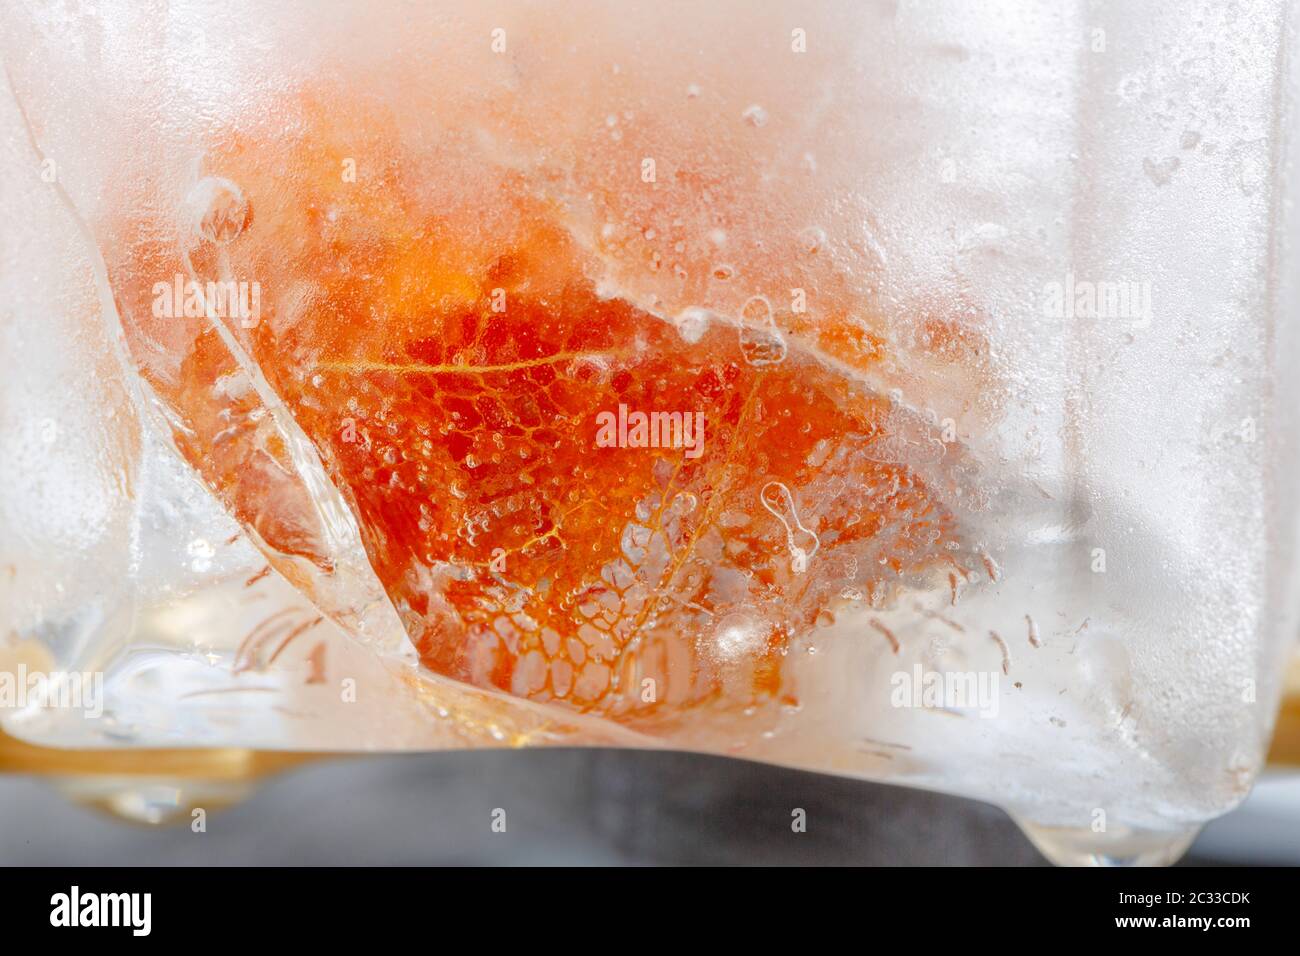 Physalis in ice Stock Photo